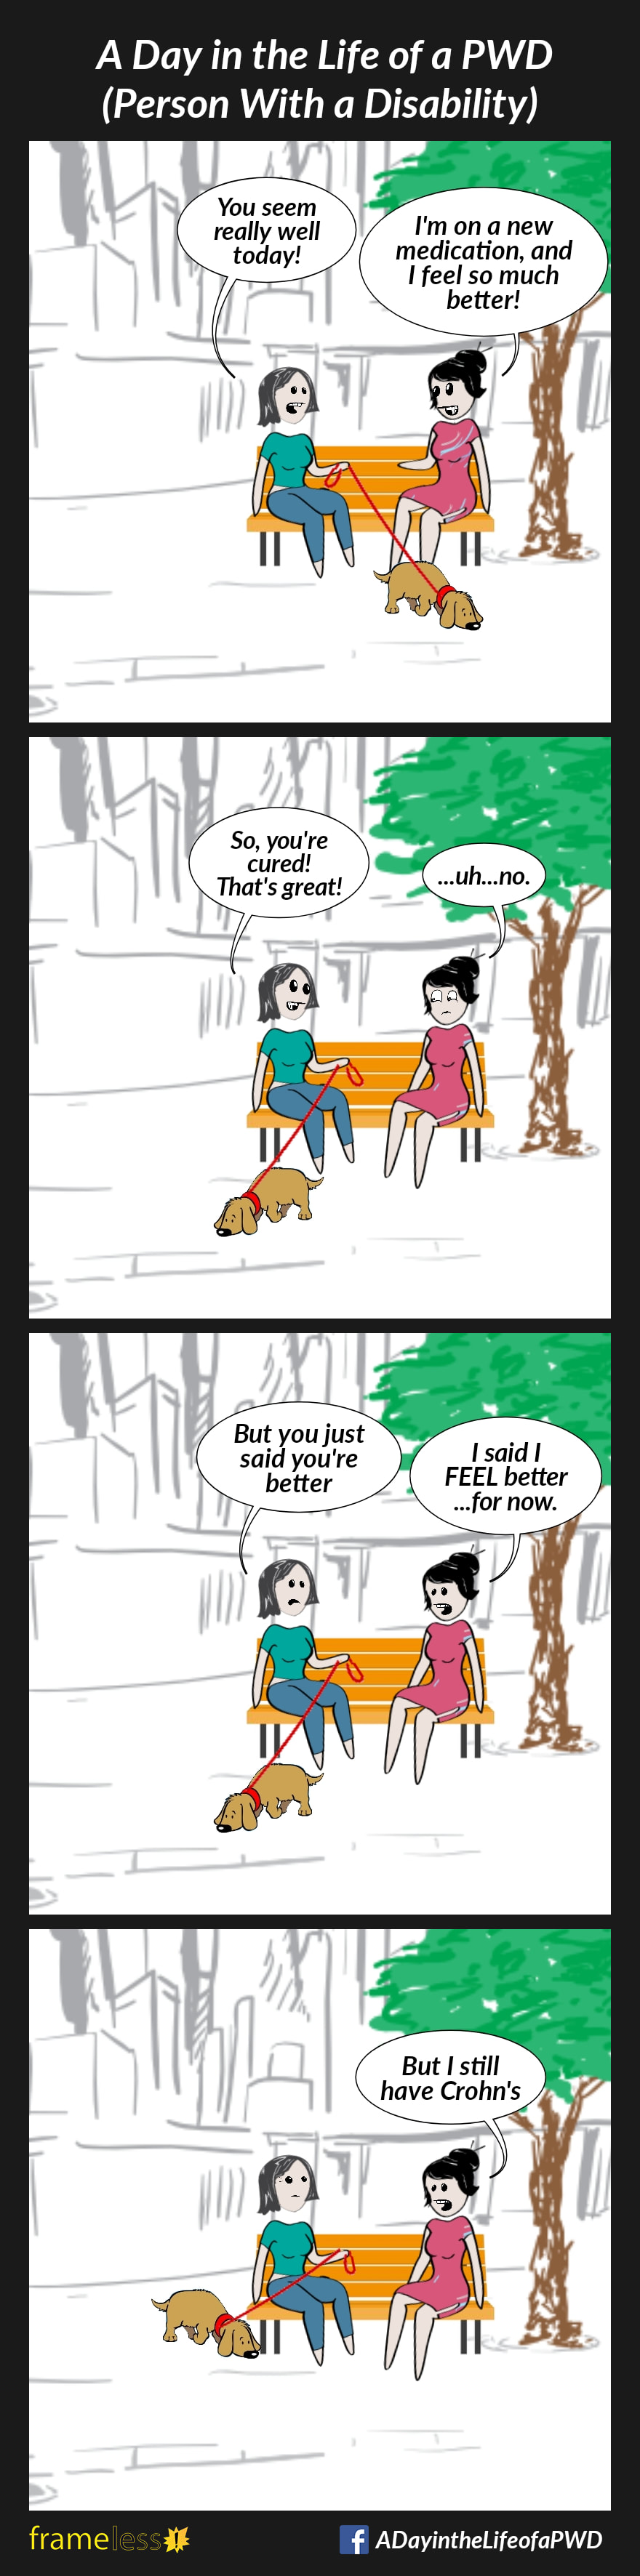 COMIC STRIP 
A Day in the Life of a PWD (Person With a Disability) 

Frame 1:
A woman and her friend are sitting on a bench beside a tree. The friend has a dog on a leash.
FRIEND: You seem really well today!
WOMAN: I'm on a new medication, and I feel much better!

Frame 2:
FRIEND: So, you're cured! That's great!
WOMAN: ...uh...no.

Frame 3:
FRIEND: But you just said you're better
WOMAN: I said I FEEL better...for now.

Frame 4:
WOMAN: But I still have Crohn's